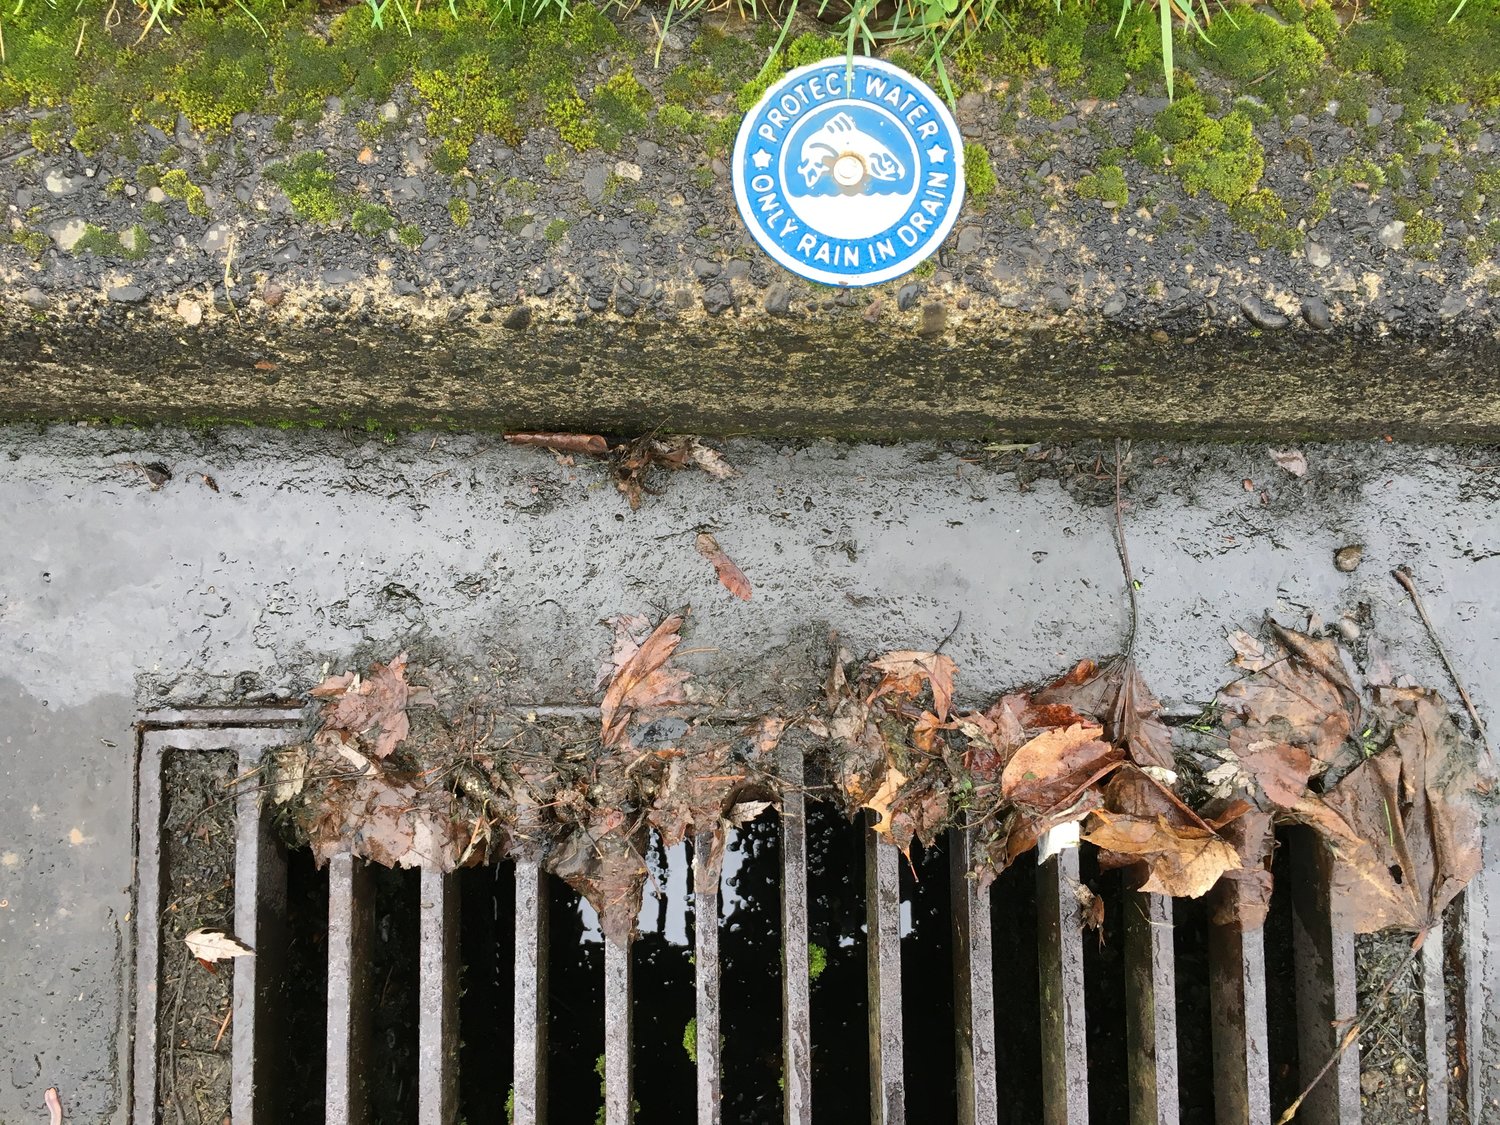 A sewer grate in Clark County reads “Protect Water, Only Rain in Drain.”